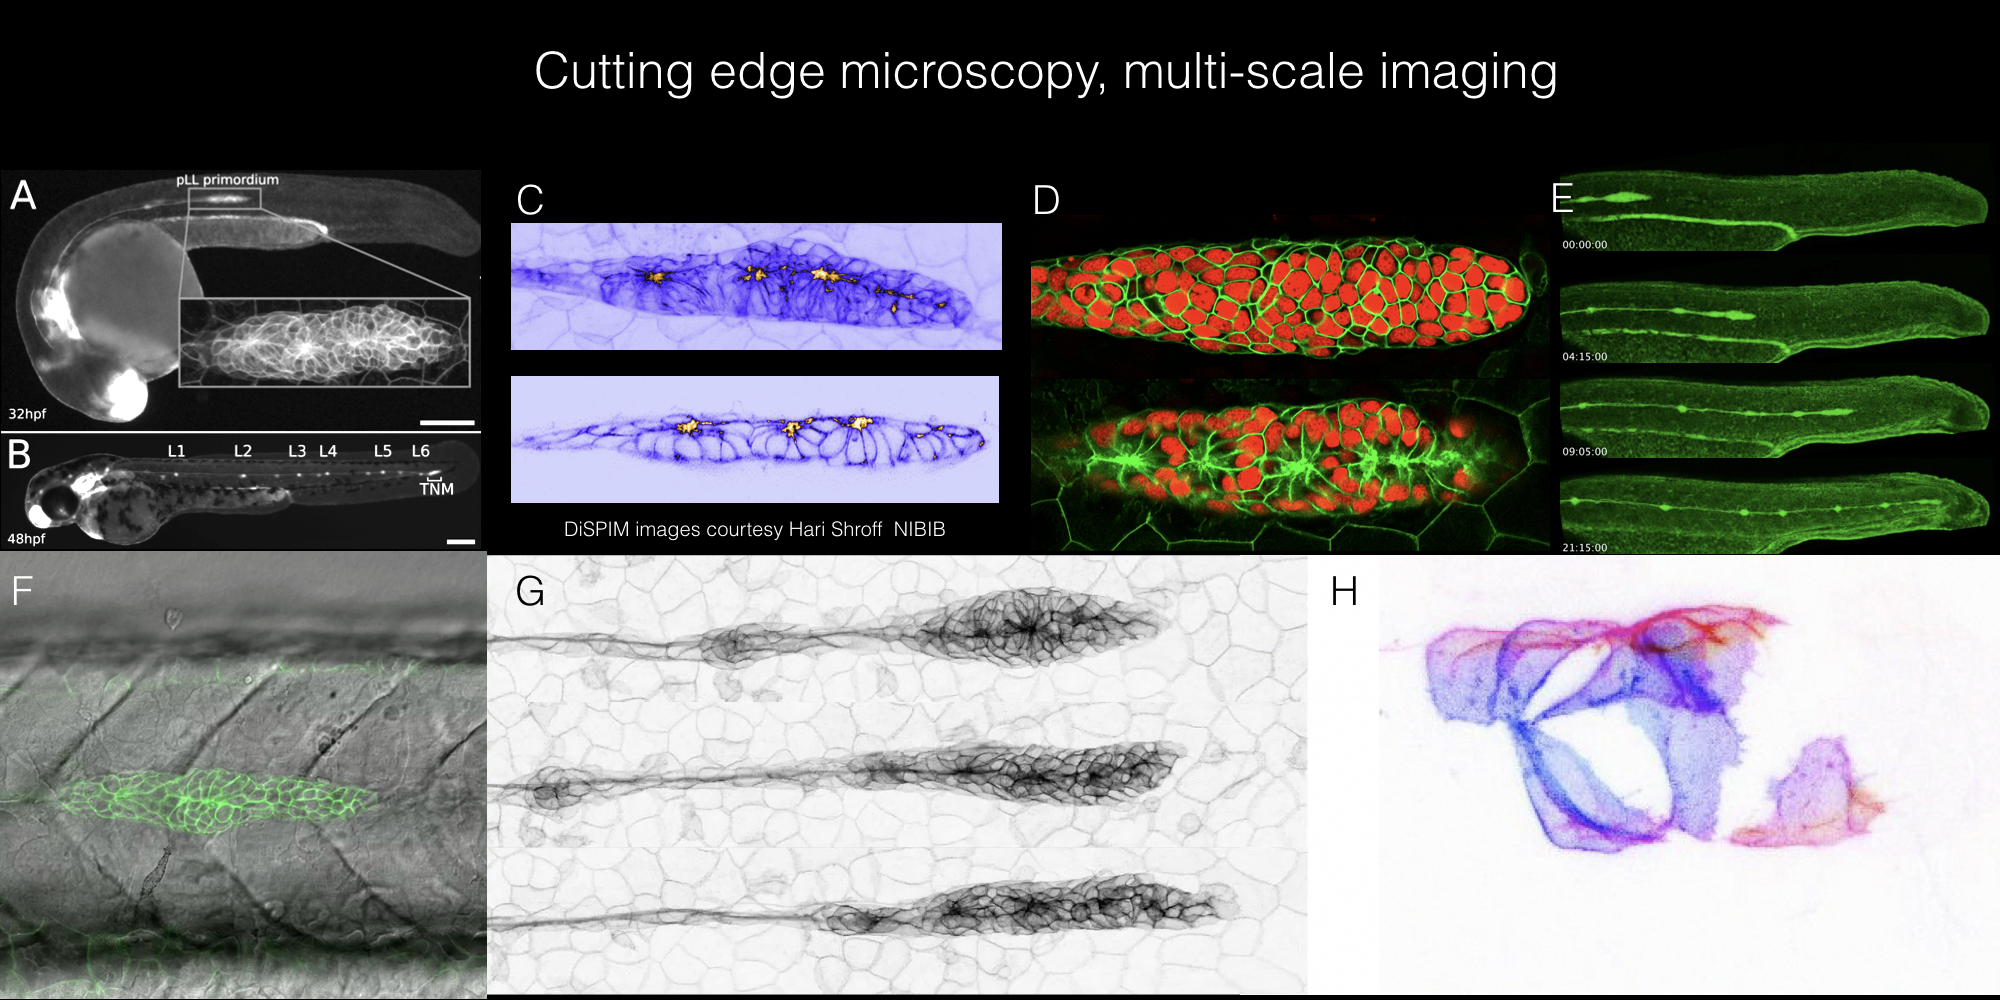 Examples of Cutting microscopy at different scales. A. primordium at 32 hpf. B. deposited neuromasts at 48 hpf. C. Di SPIM images. E Confocal slices with nuclei and membranes. F. Fluorescent primordium on somites. G. Sequential frames from  time lapse  movie. H. Depth coded confocal slices showing isolated primordium cells.